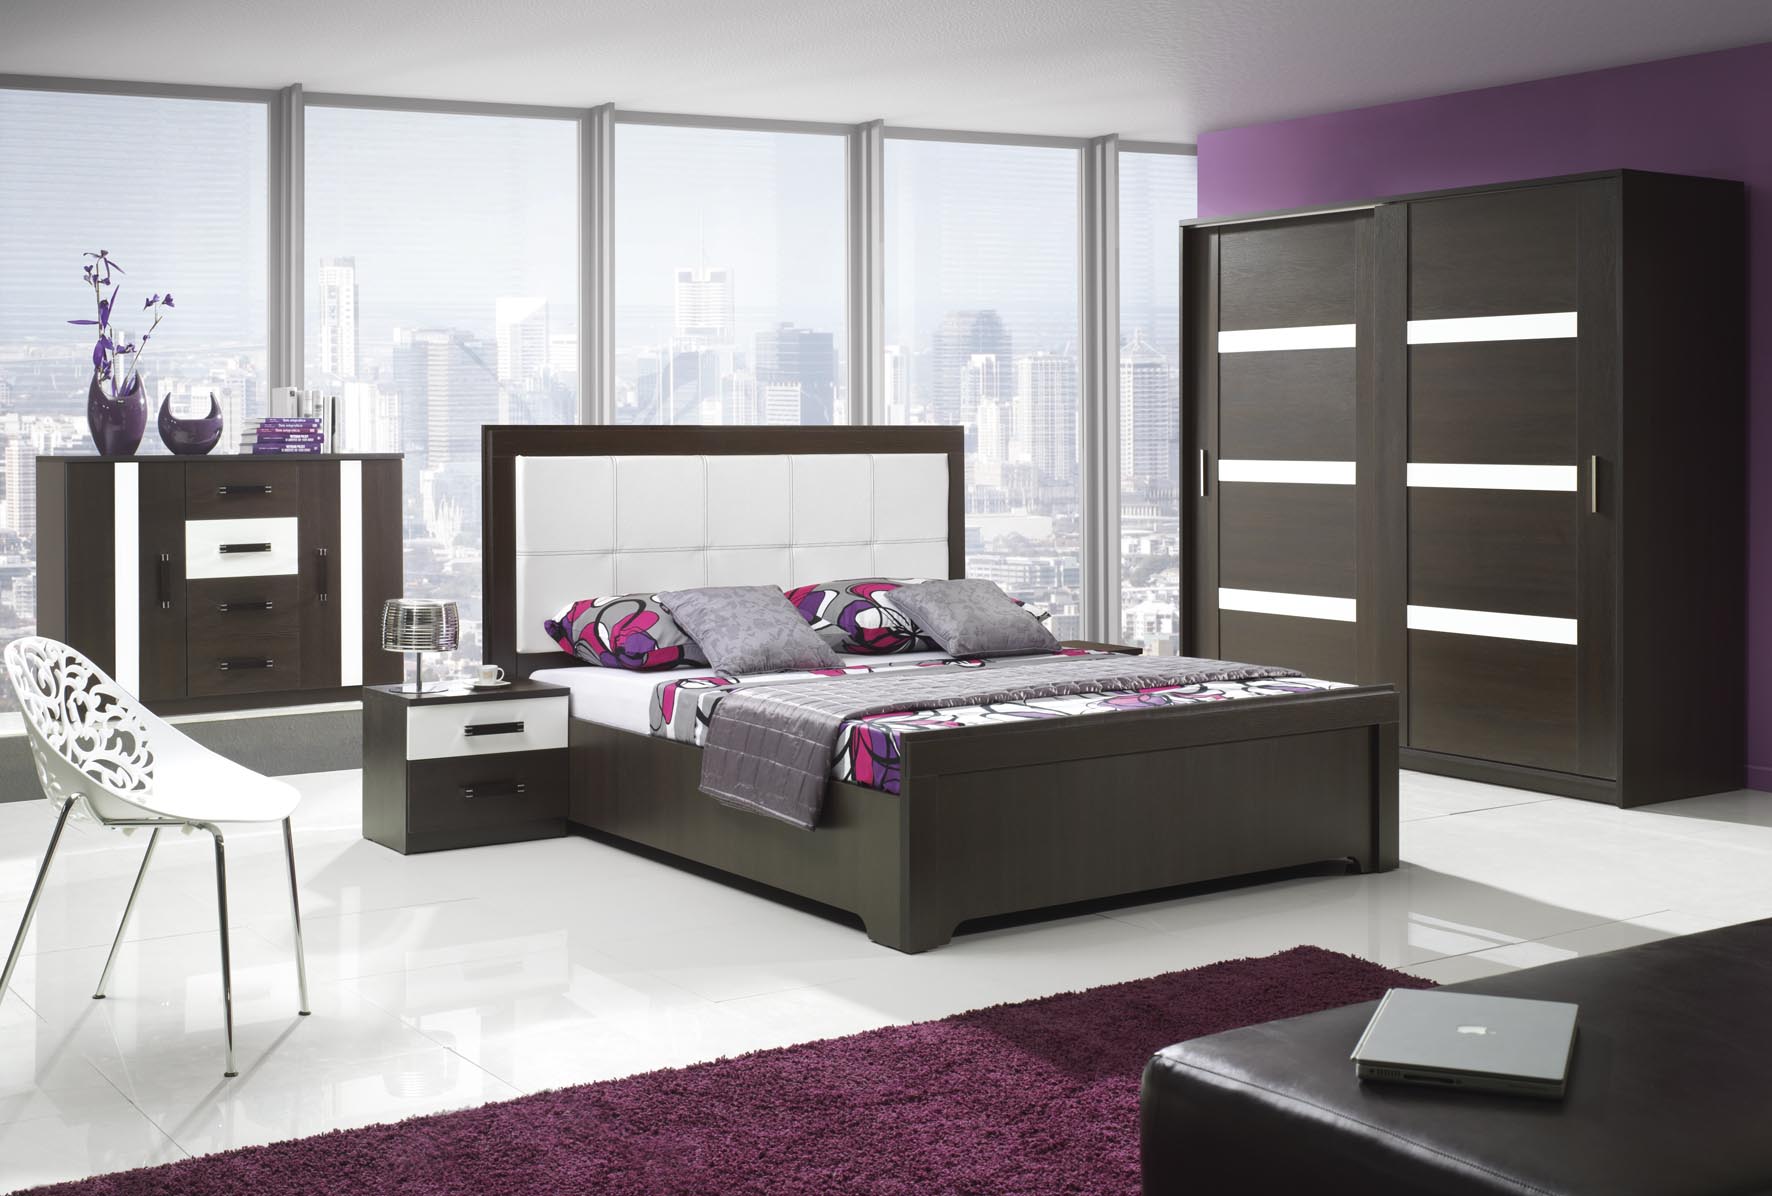 25 Bedroom Furniture Design Ideas - The WoW Style